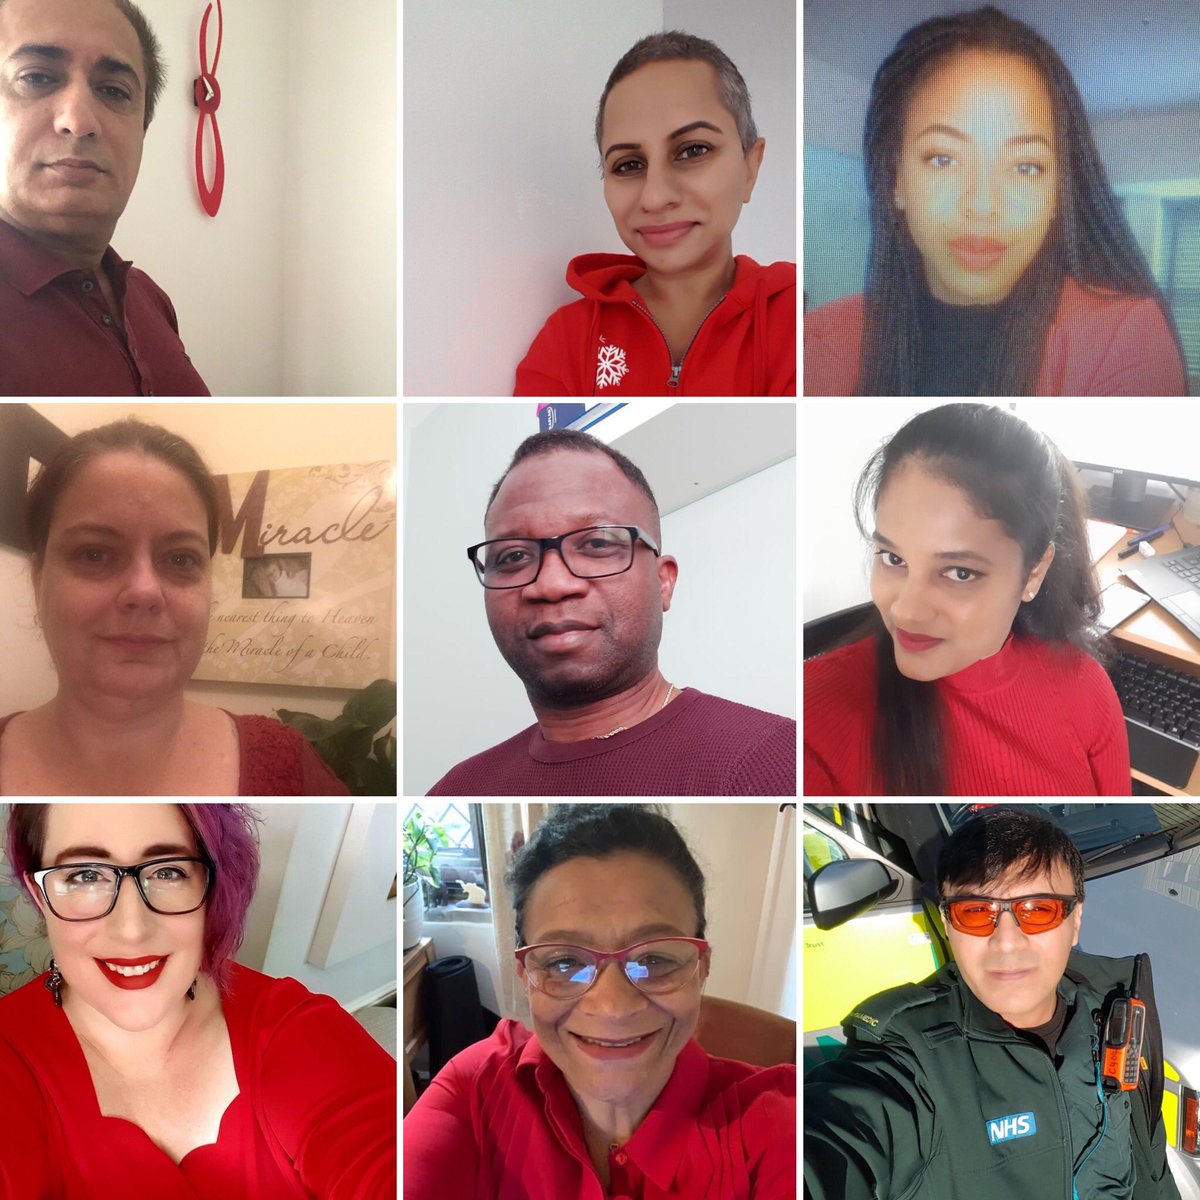 @SECAmbulance and members of our Aspire #StaffNetwork showing their commitment to #StampOutRacism  today, tomorrow and everyday!

#WRD20 #RedAgainstRacism